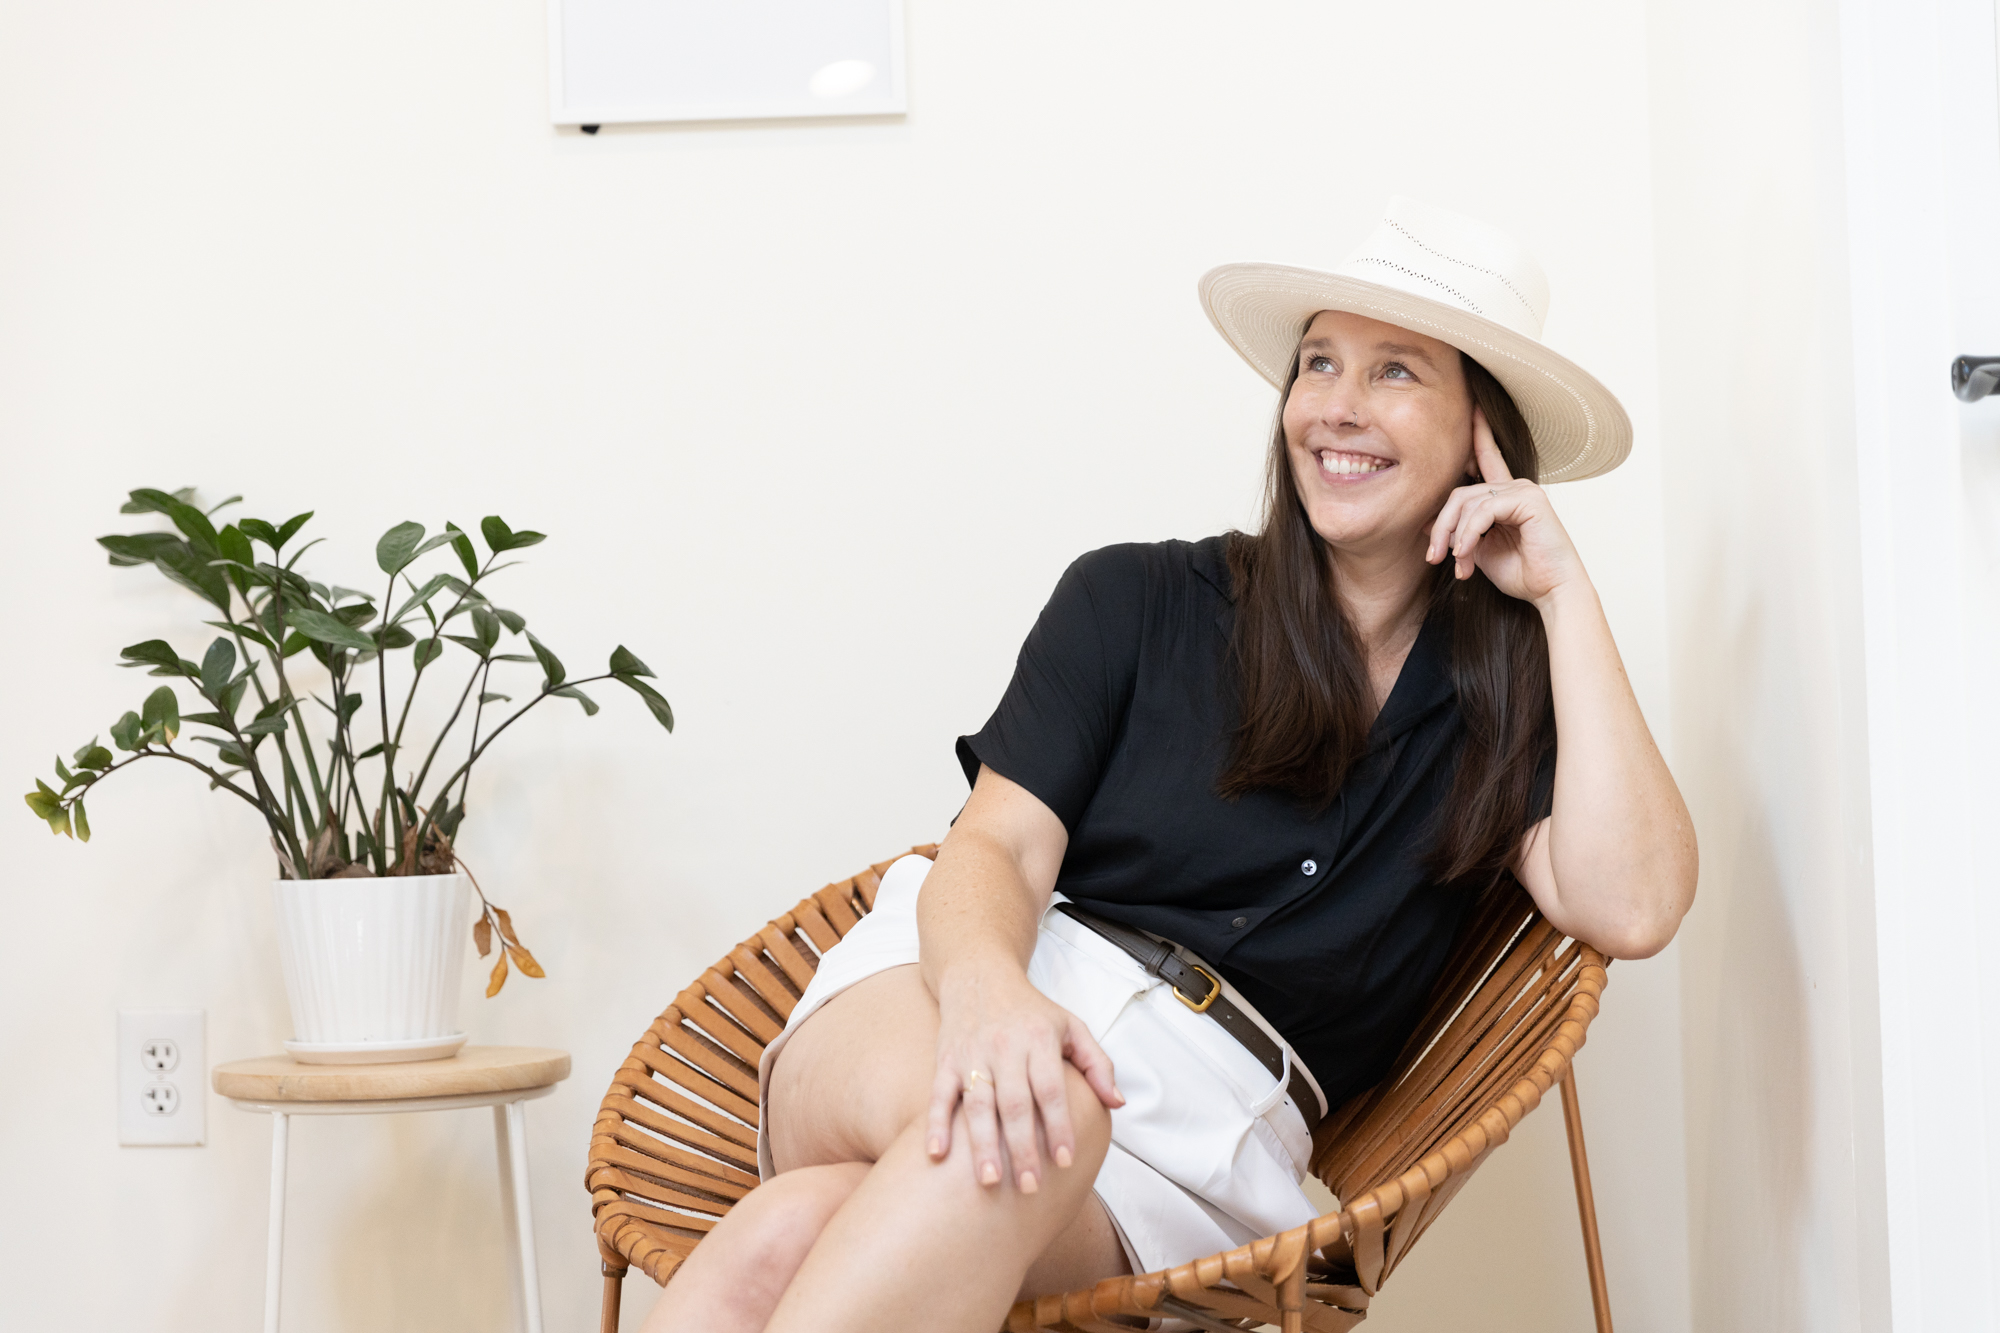 Branding Photographer sitting in a wicker chair next to plant wearing white straw hat, black blouse and white shorts